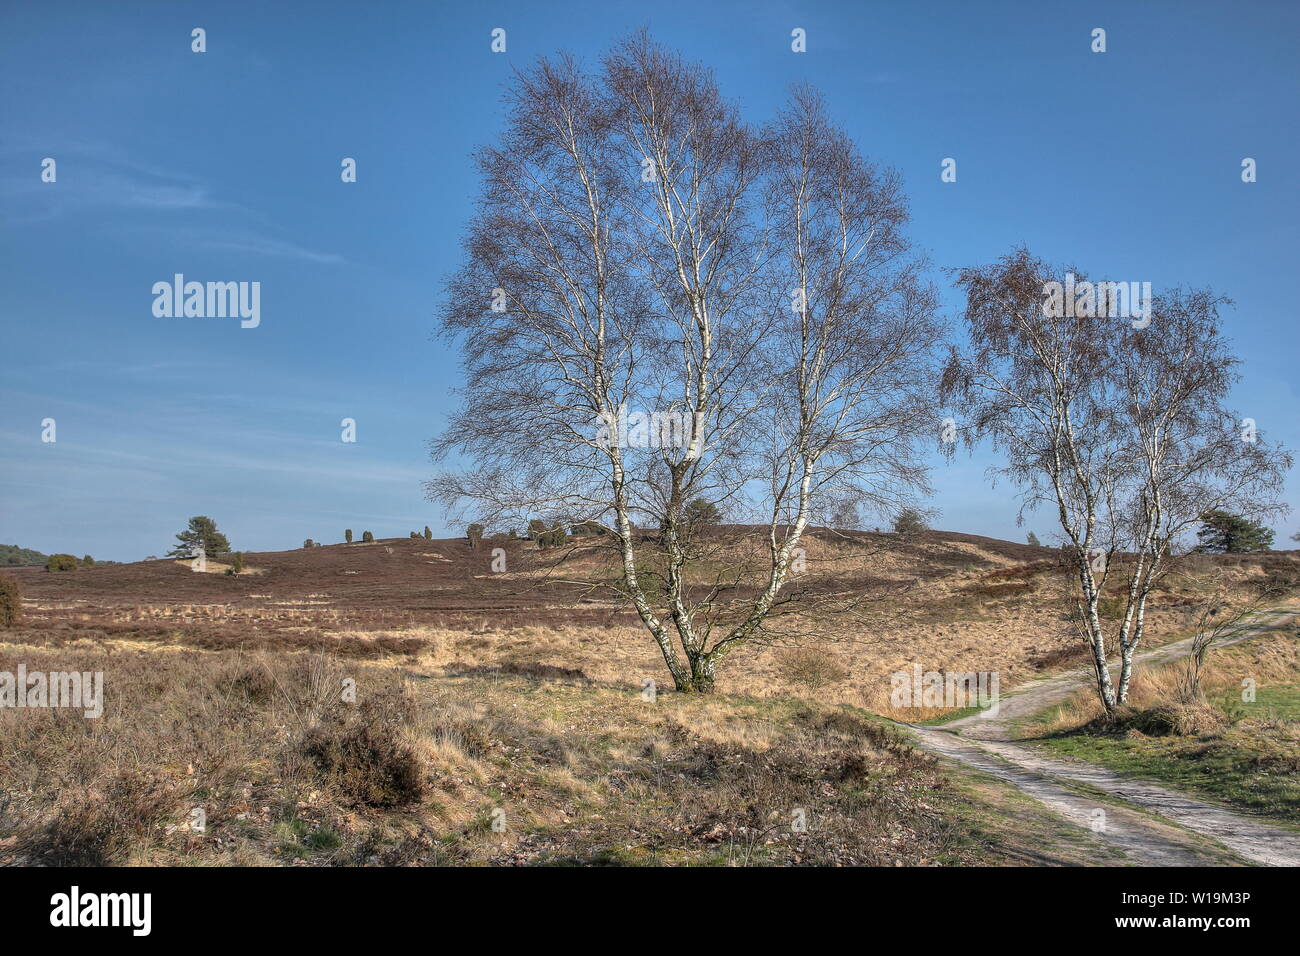 Gentle hills, idyllic hiking trails lined with birches run through the nature reserve Luneburg Heath. Stock Photo